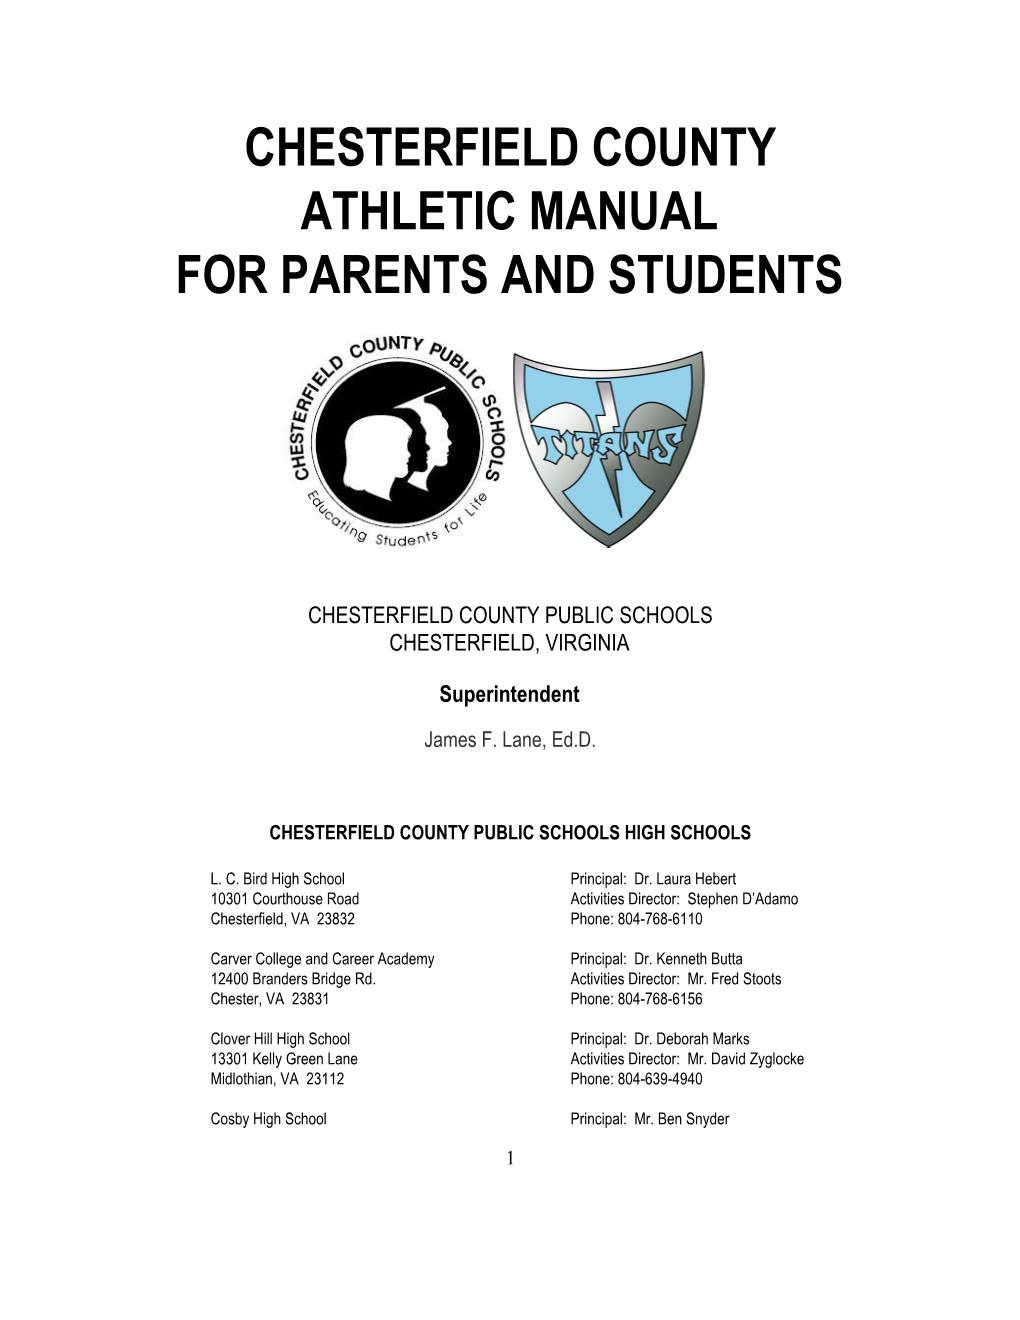 Chesterfield County Athletic Manual for Parents And